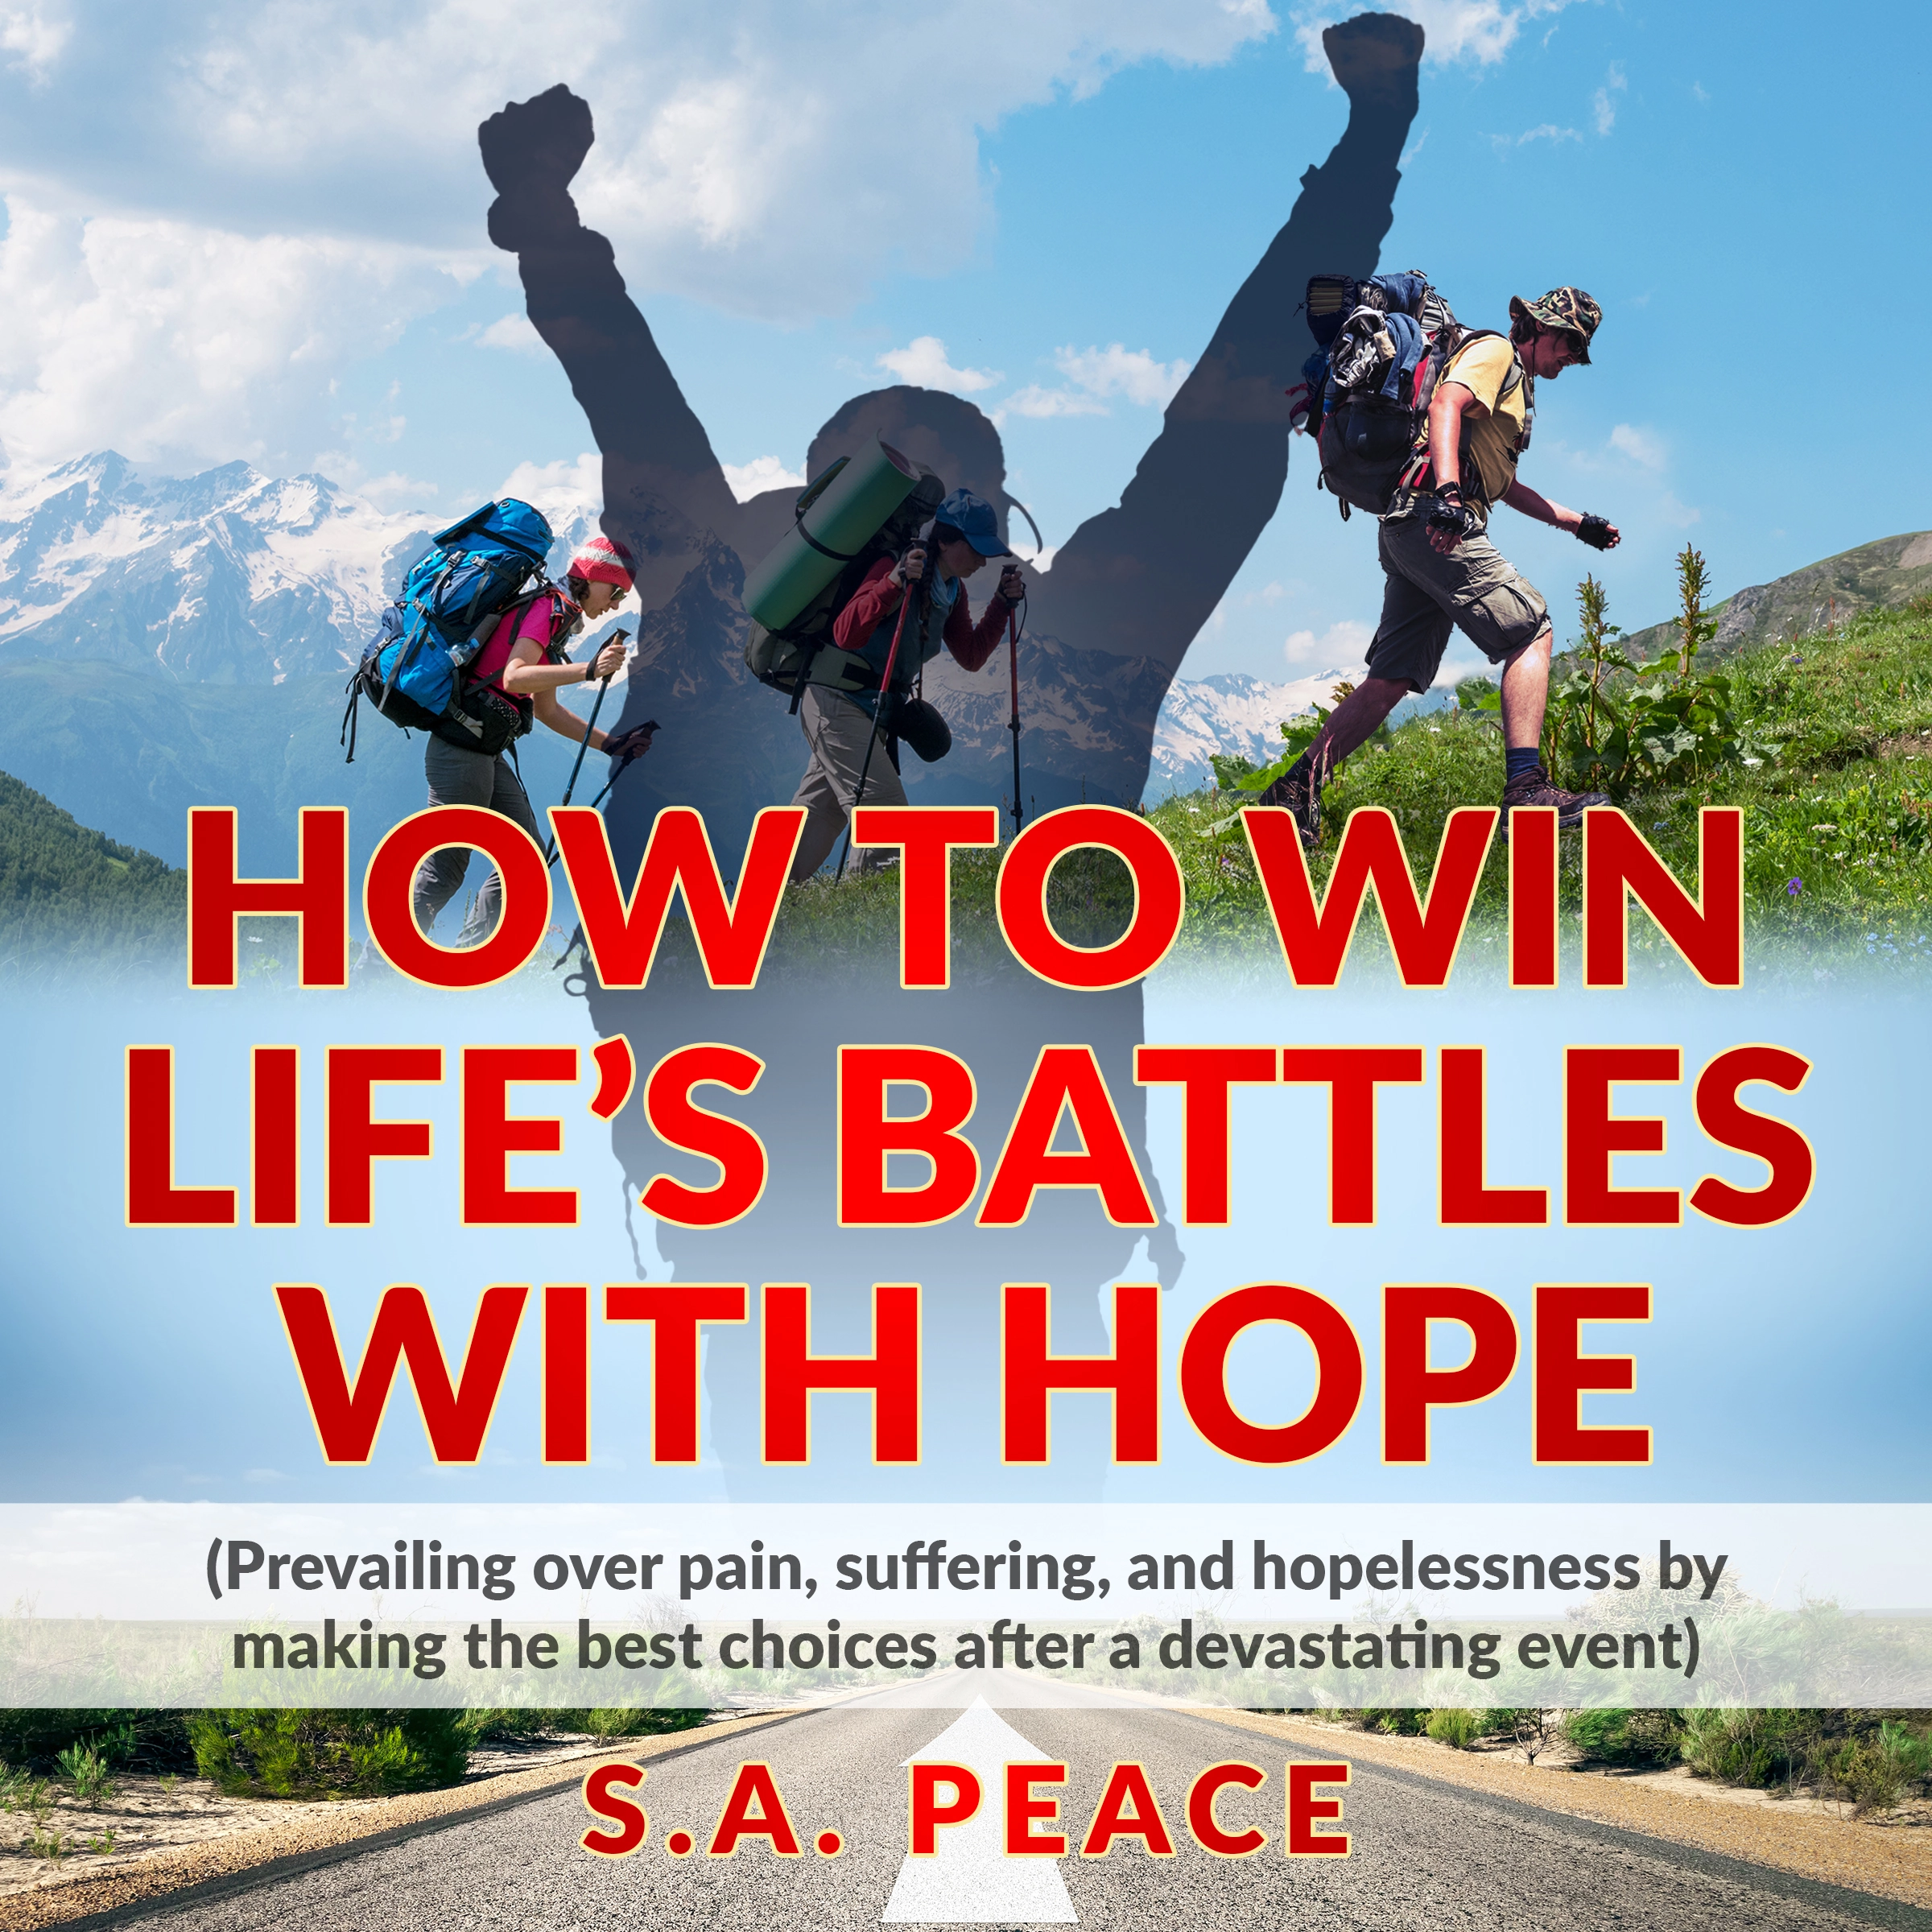 How to Win Life's Battles with Hope by S.A PEACE Audiobook